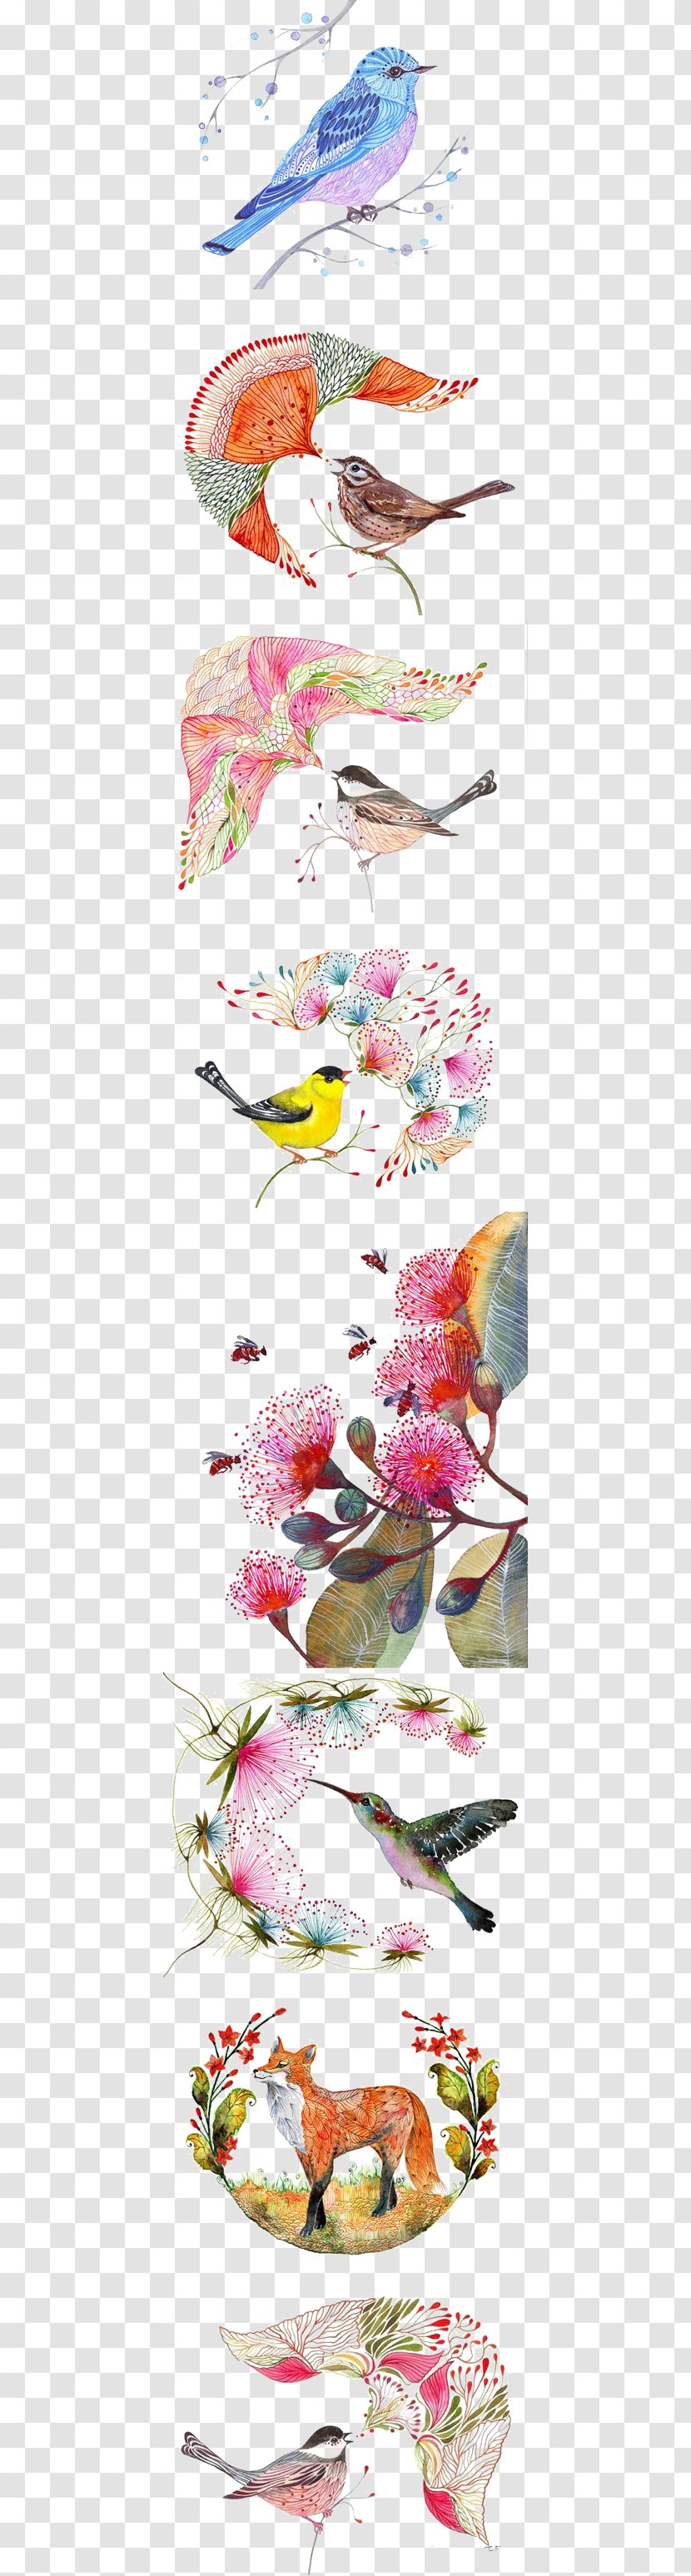 Bird Owl Drawing Watercolor Painting Illustration - Pattern Transparent PNG